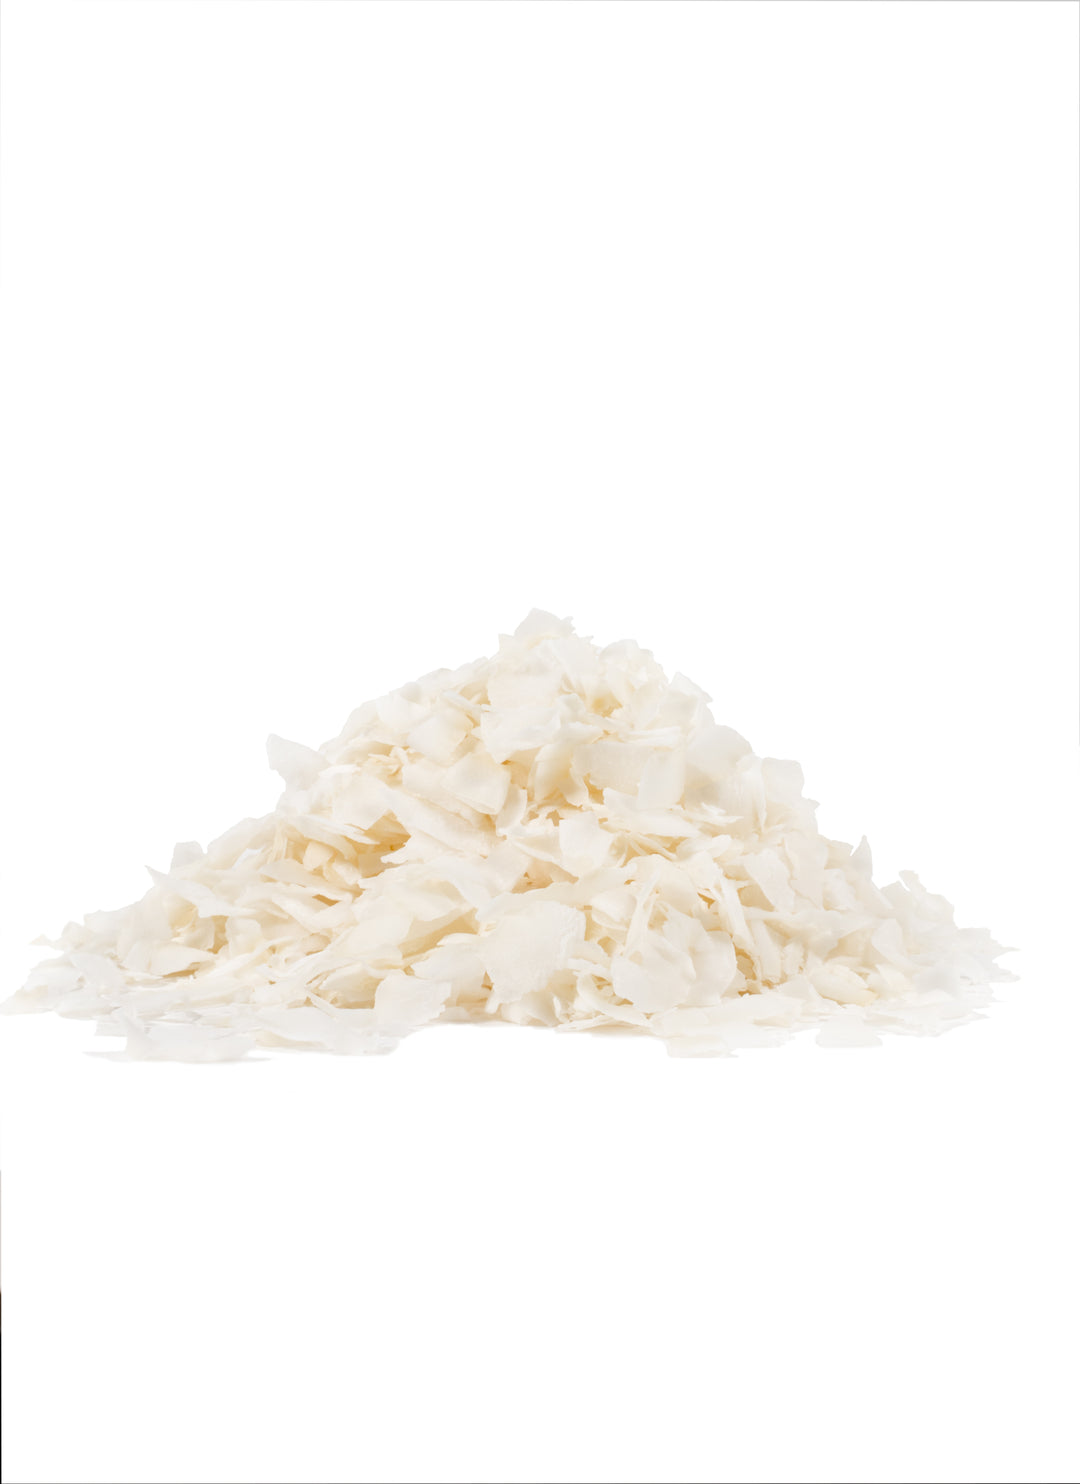 Bob's Red Mill Natural Foods Inc Kosher Coconut Flakes-25 lb.